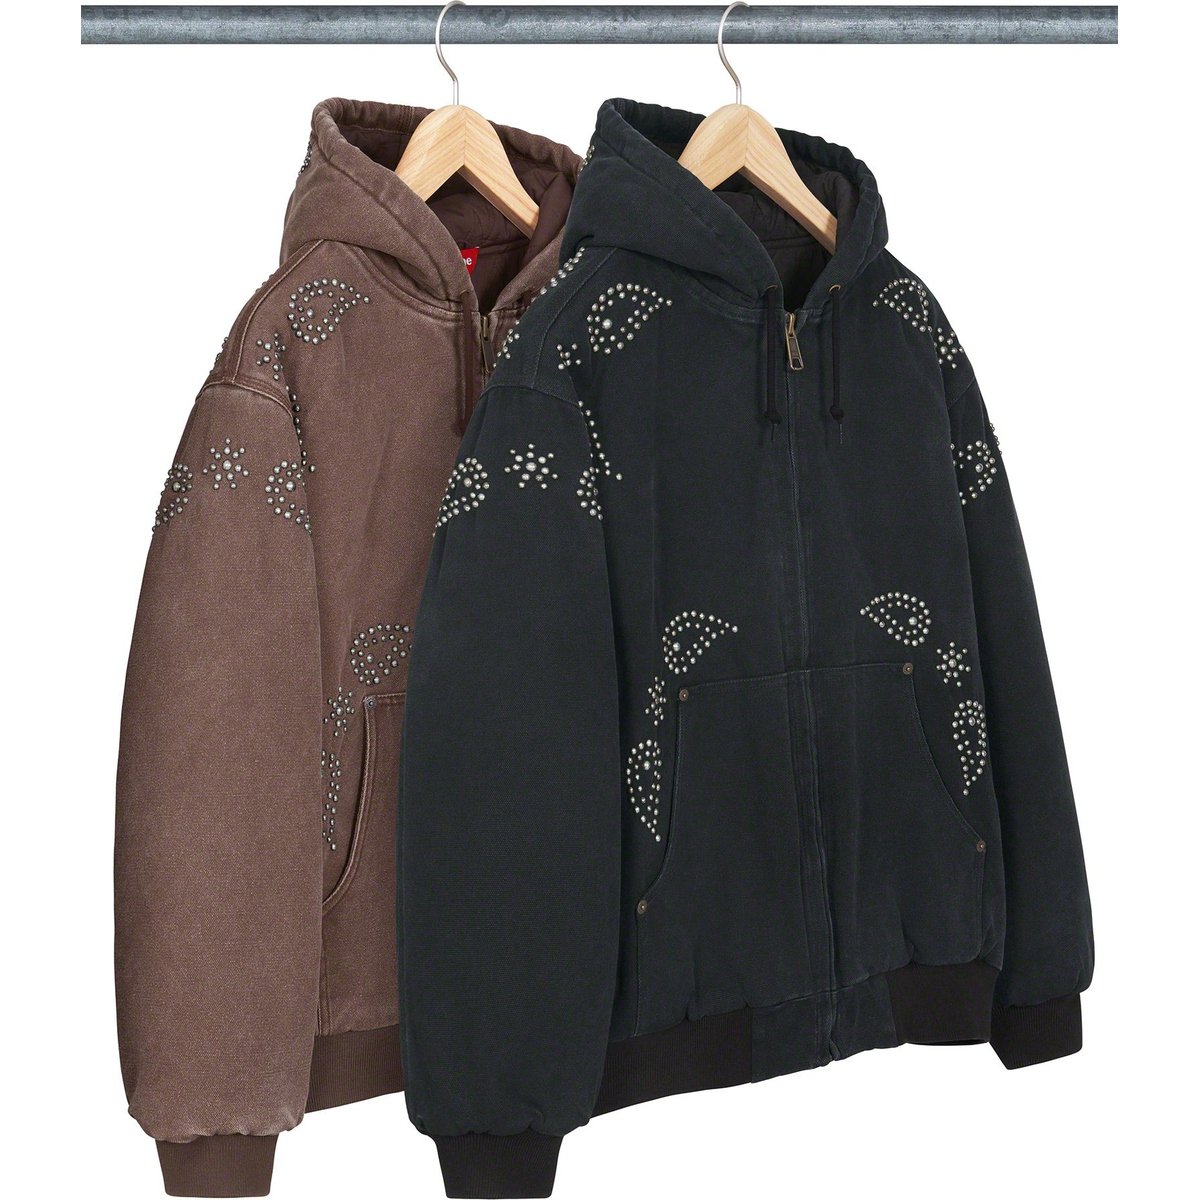 Supreme Paisley Studded Work Jacket released during fall winter 23 season